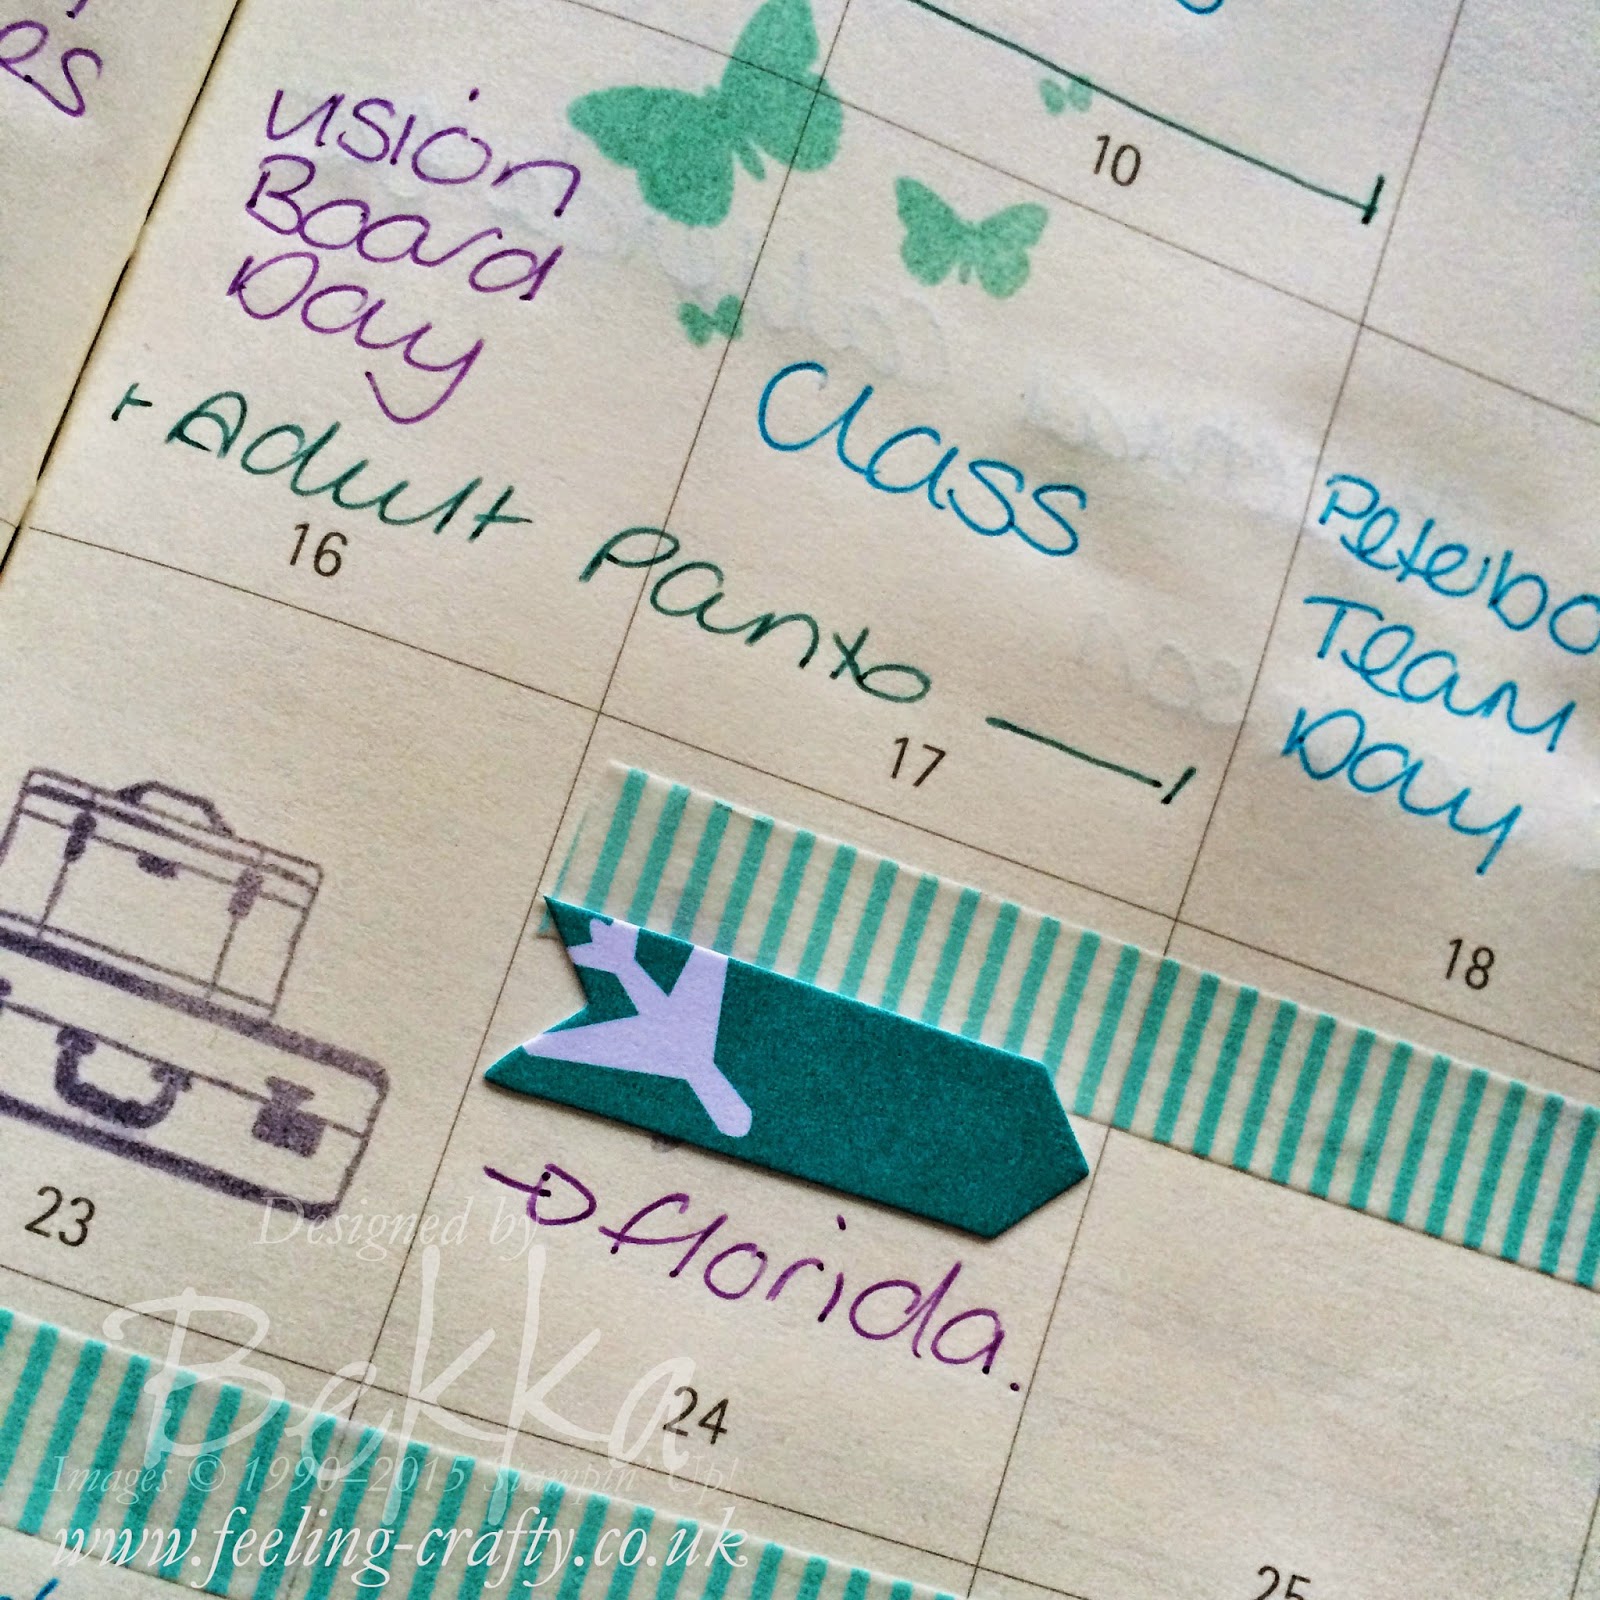 Cutomise your Diary / Planner using Project Life Supplies by Stampin' Up! Get them here